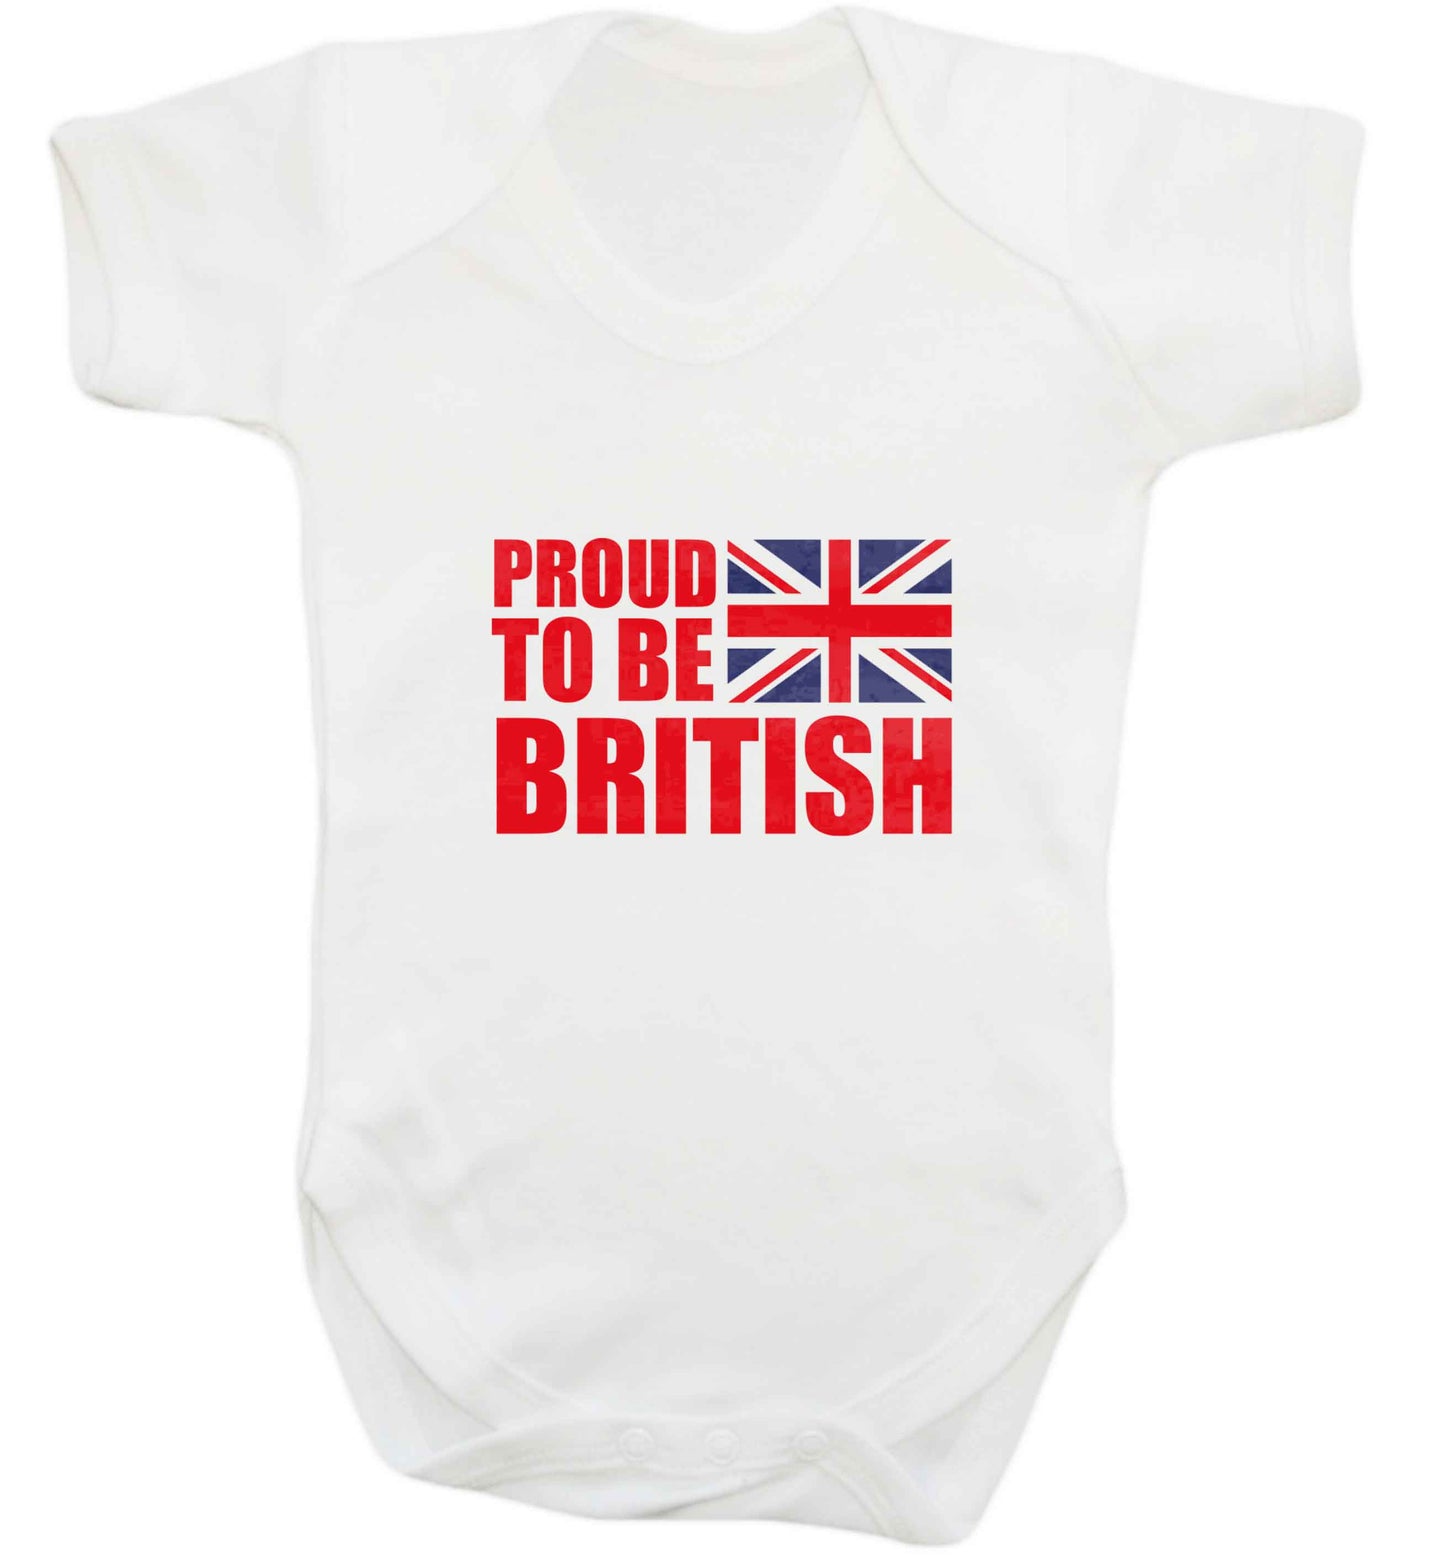 Proud to be British baby vest white 18-24 months